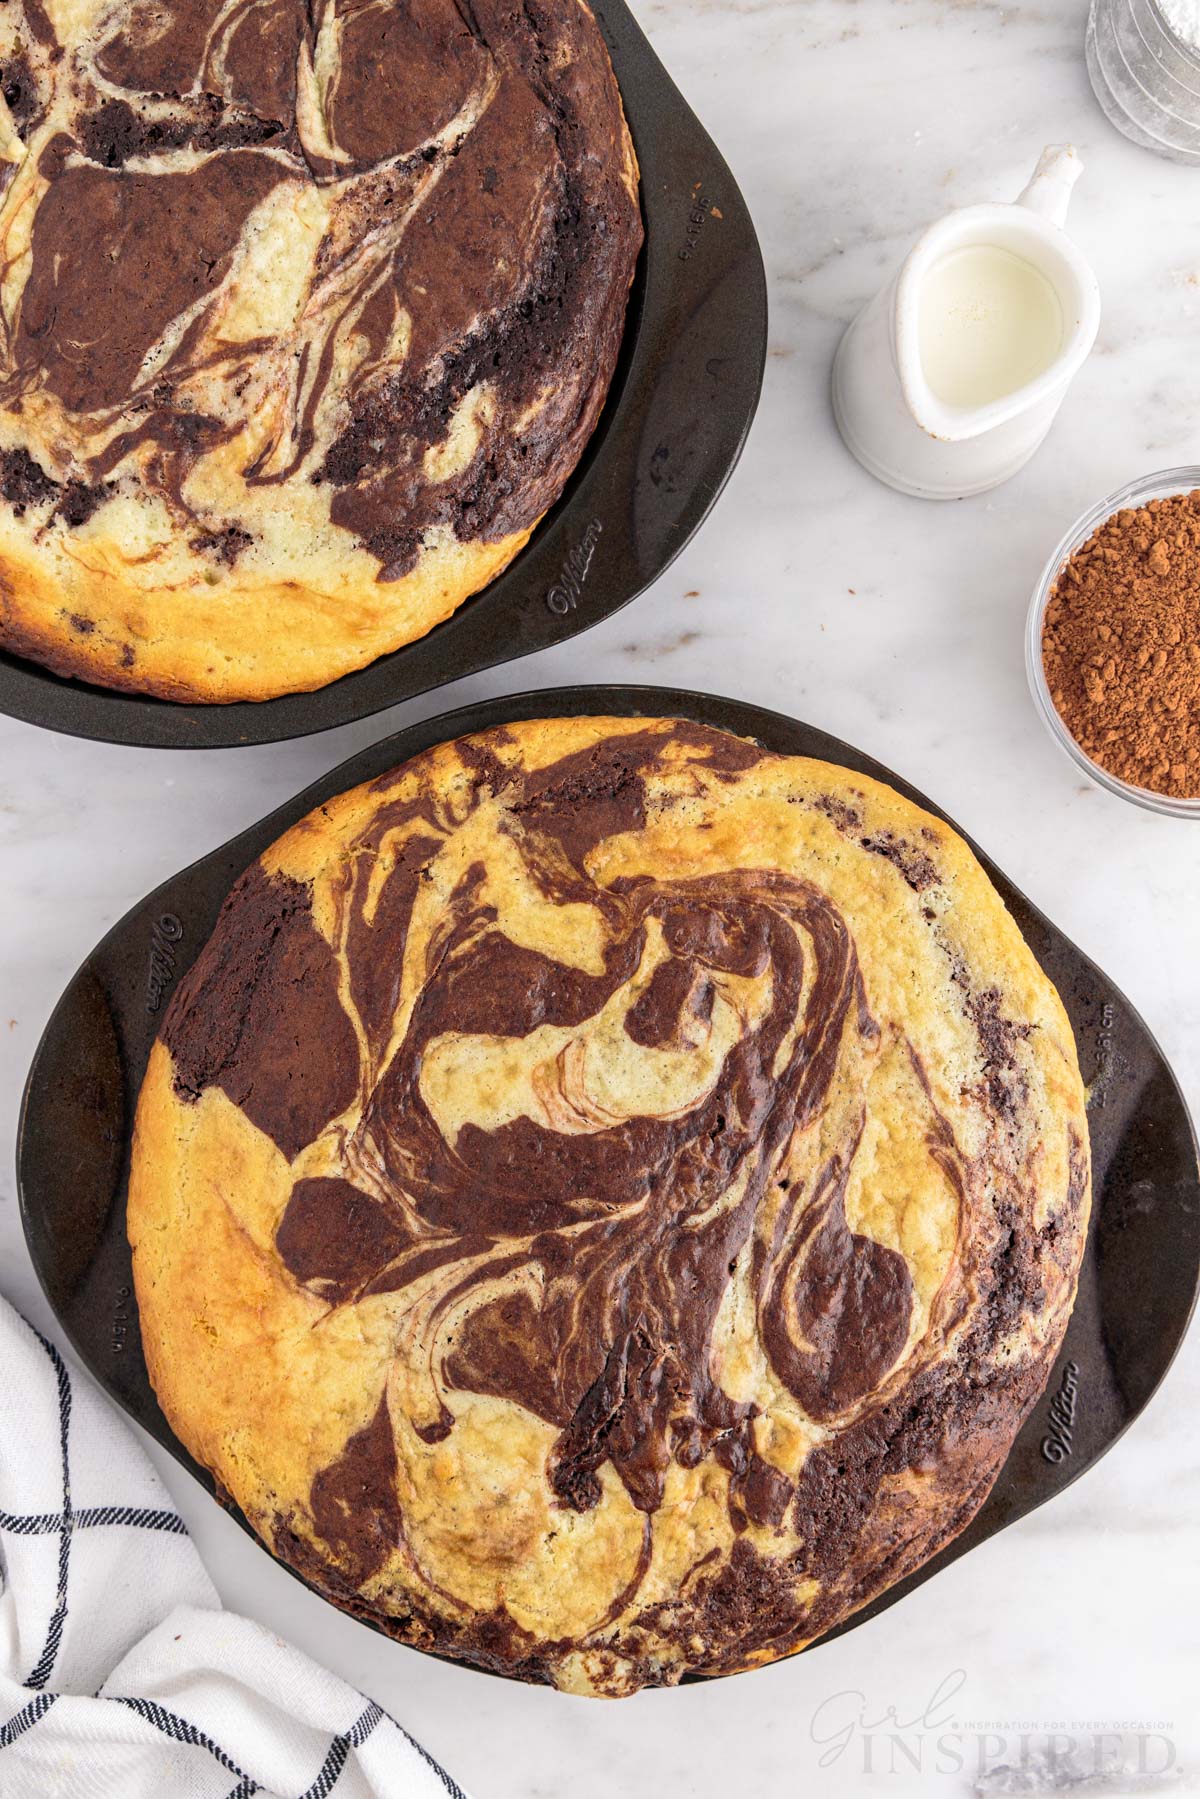 Baked marble cake in two cake pans, checkered linen, small bowl of unsweetened cocoa powder, jug of milk, on a marble countertop.